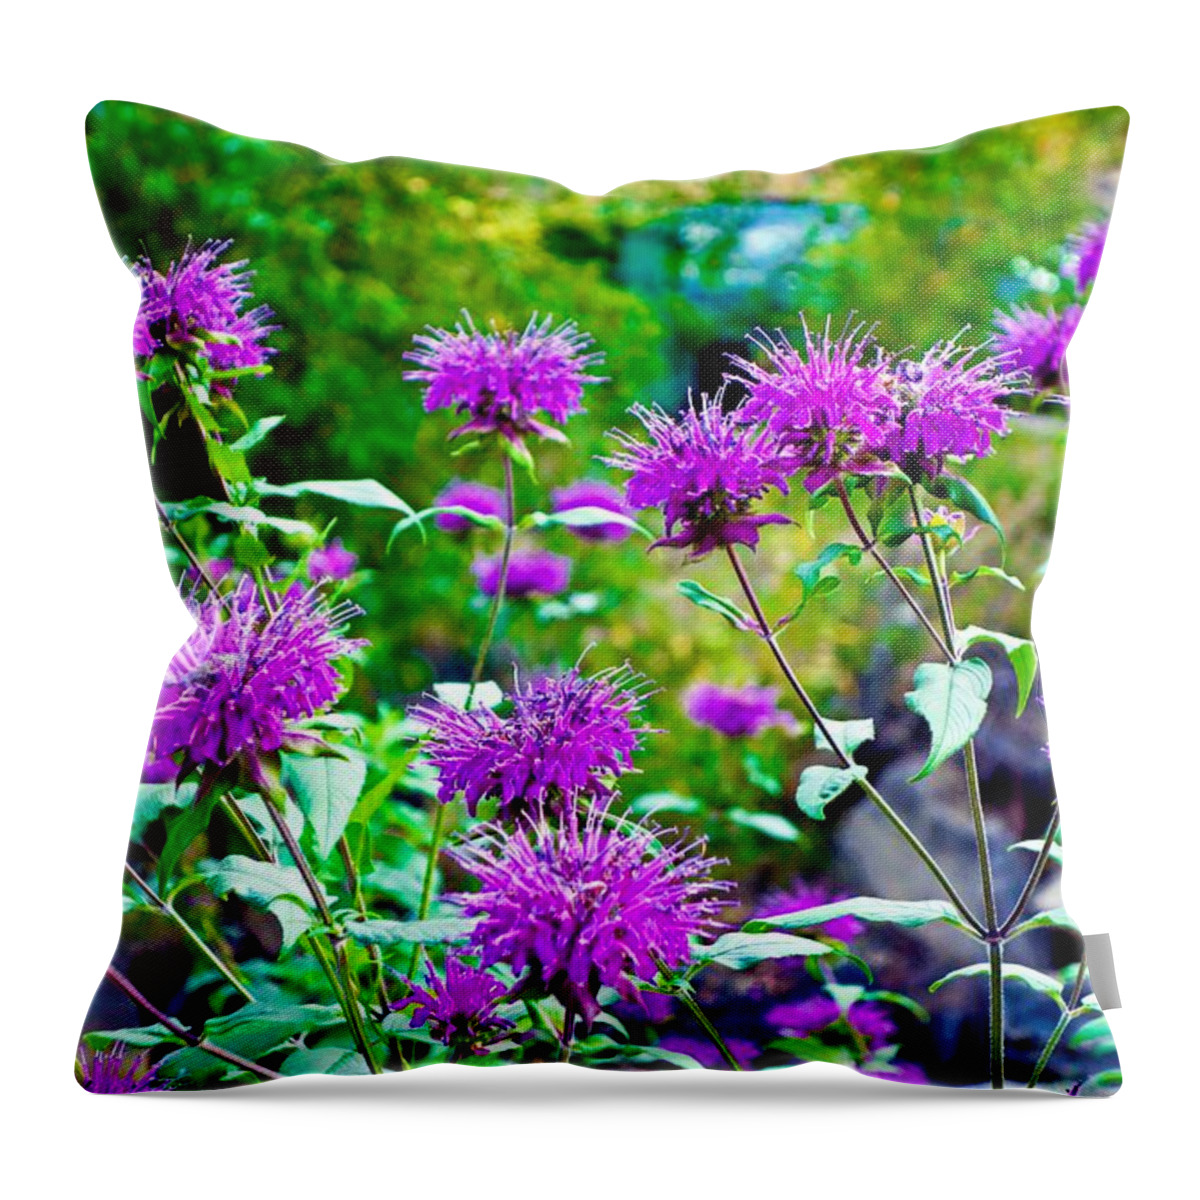 Tall Grasses Throw Pillow featuring the photograph Estes Park Fall Study 2 by Robert Meyers-Lussier